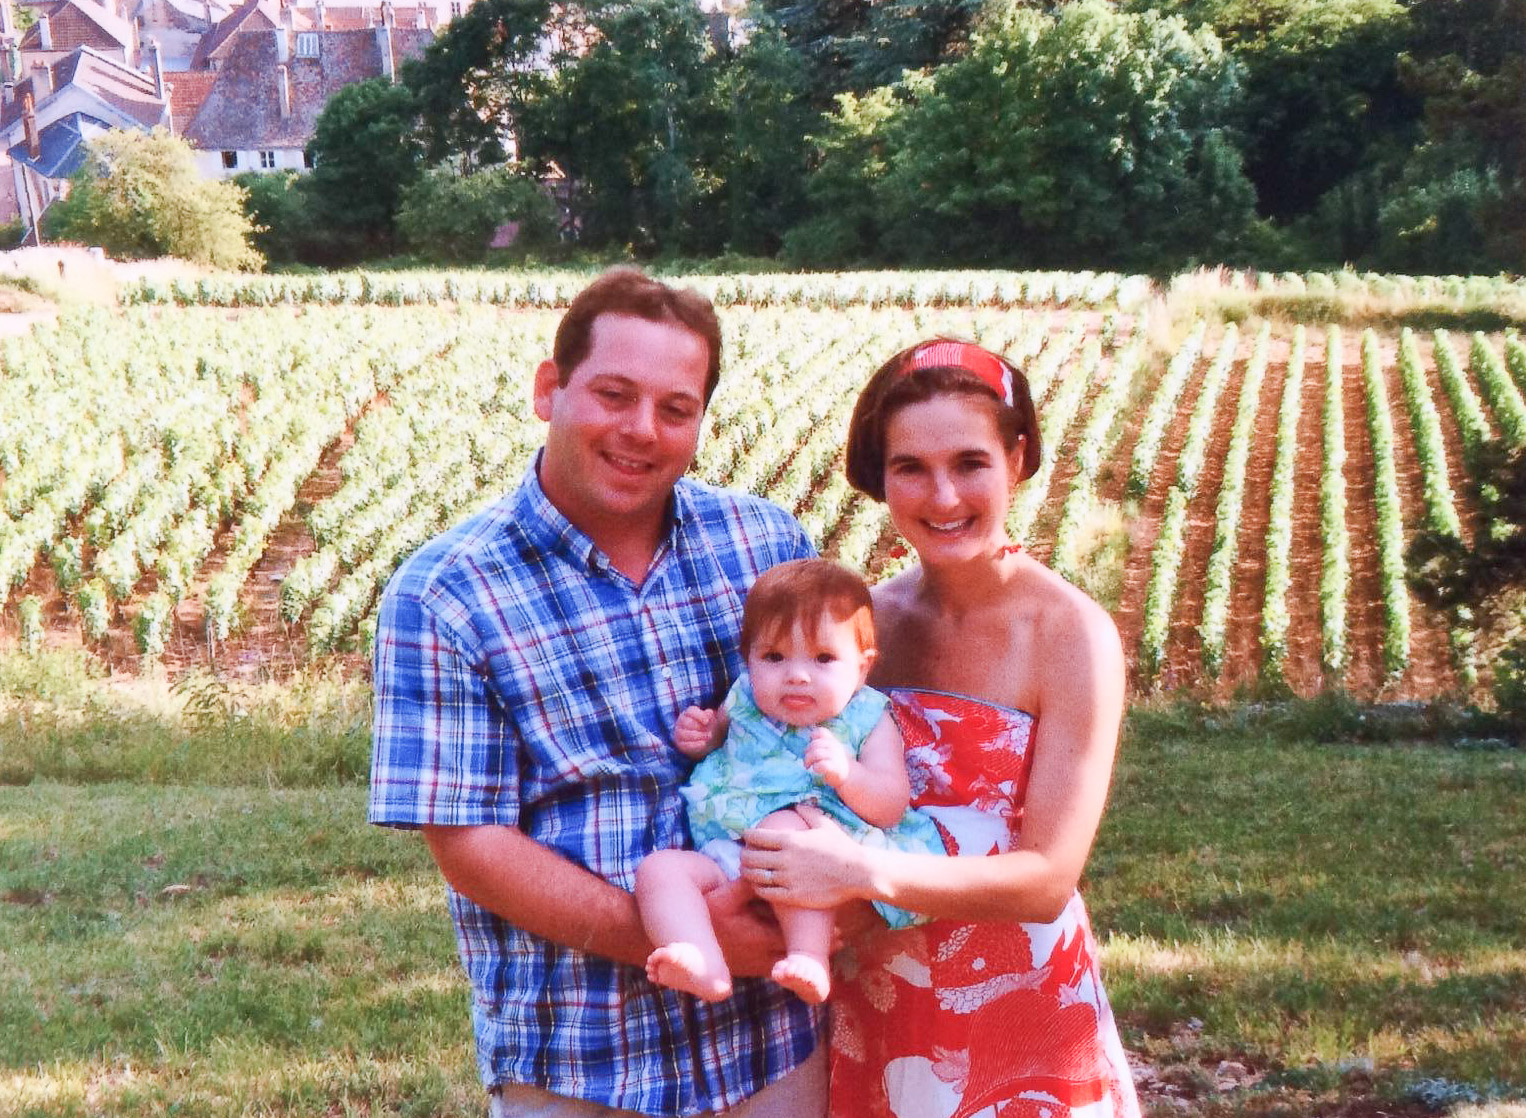  The couple took their daughter, Cynthia, on a trip to the Burgundy Region of France. 